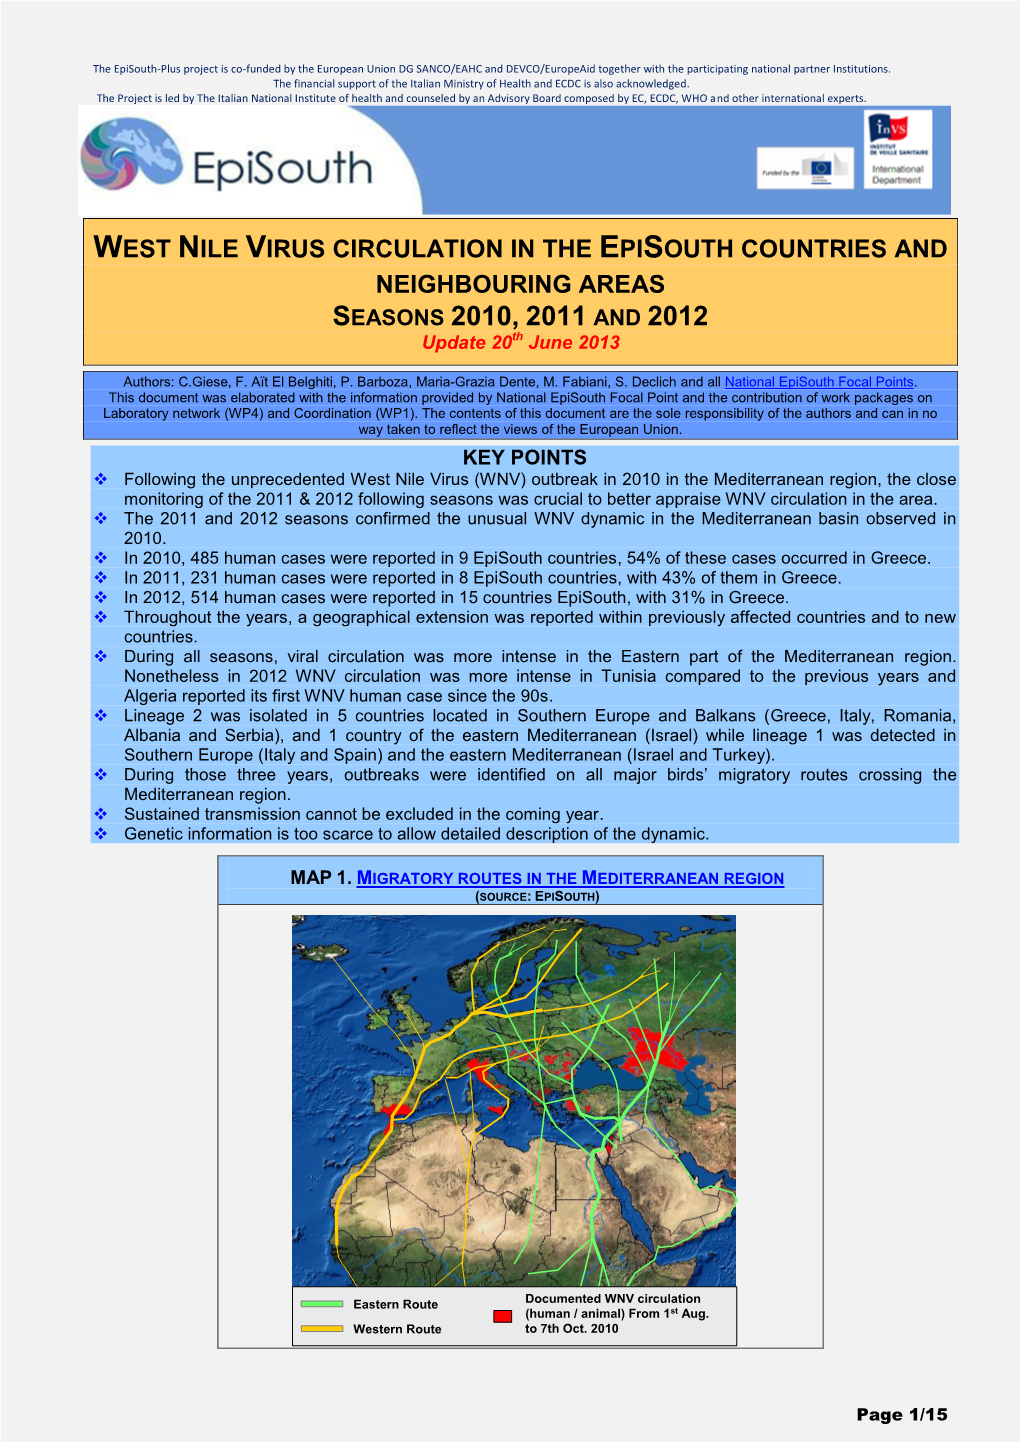 WEST NILE VIRUS CIRCULATION in the EPISOUTH COUNTRIES and NEIGHBOURING AREAS SEASONS 2010, 2011 and 2012 Update 20Th June 2013